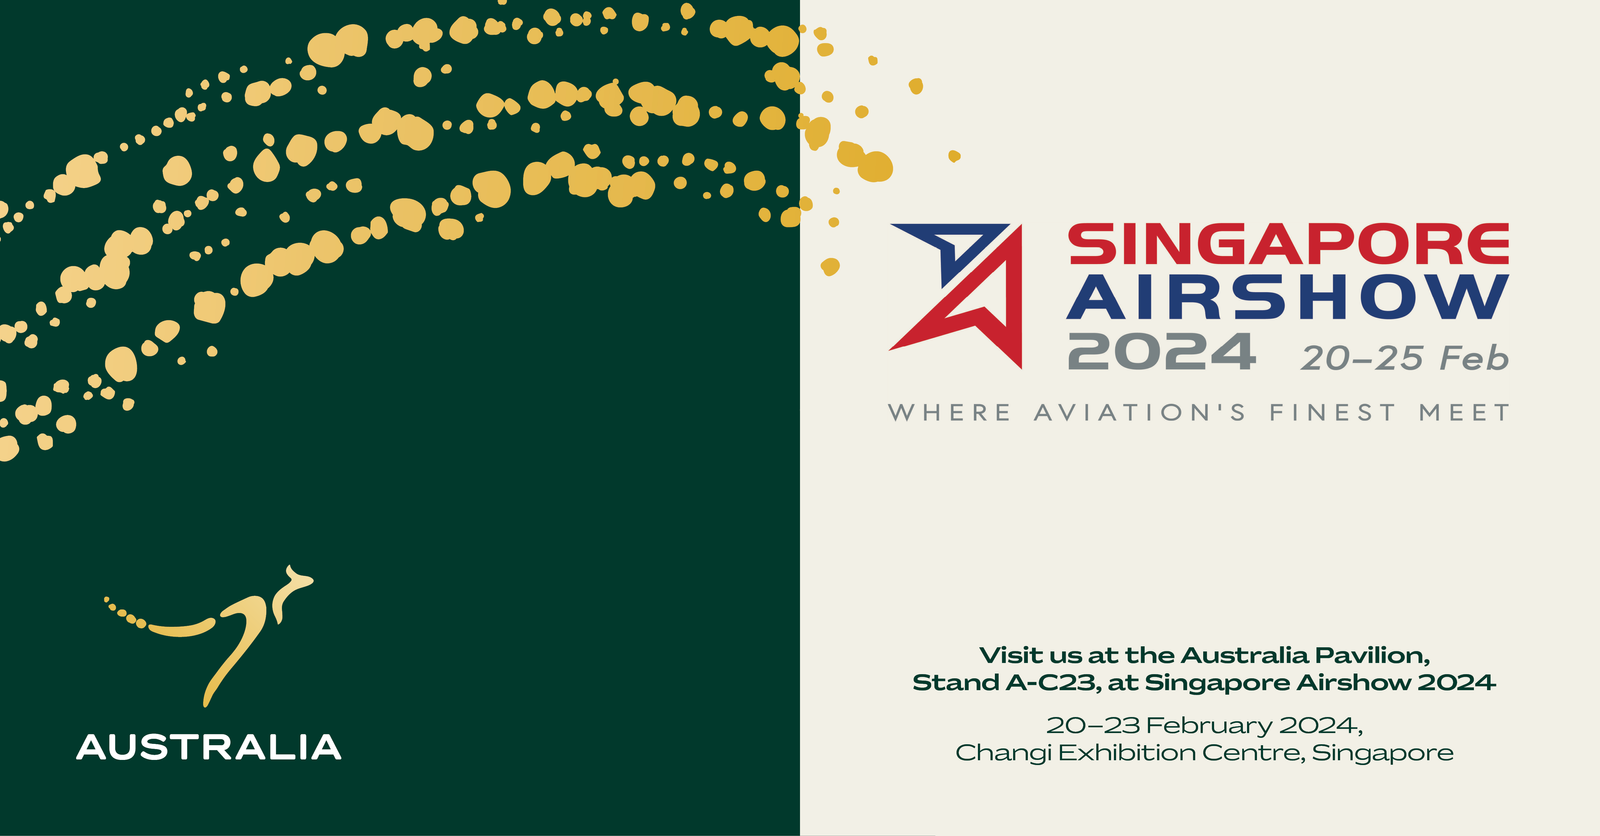 Visit us during the Singapore Airshow 2025th February 2024 at the